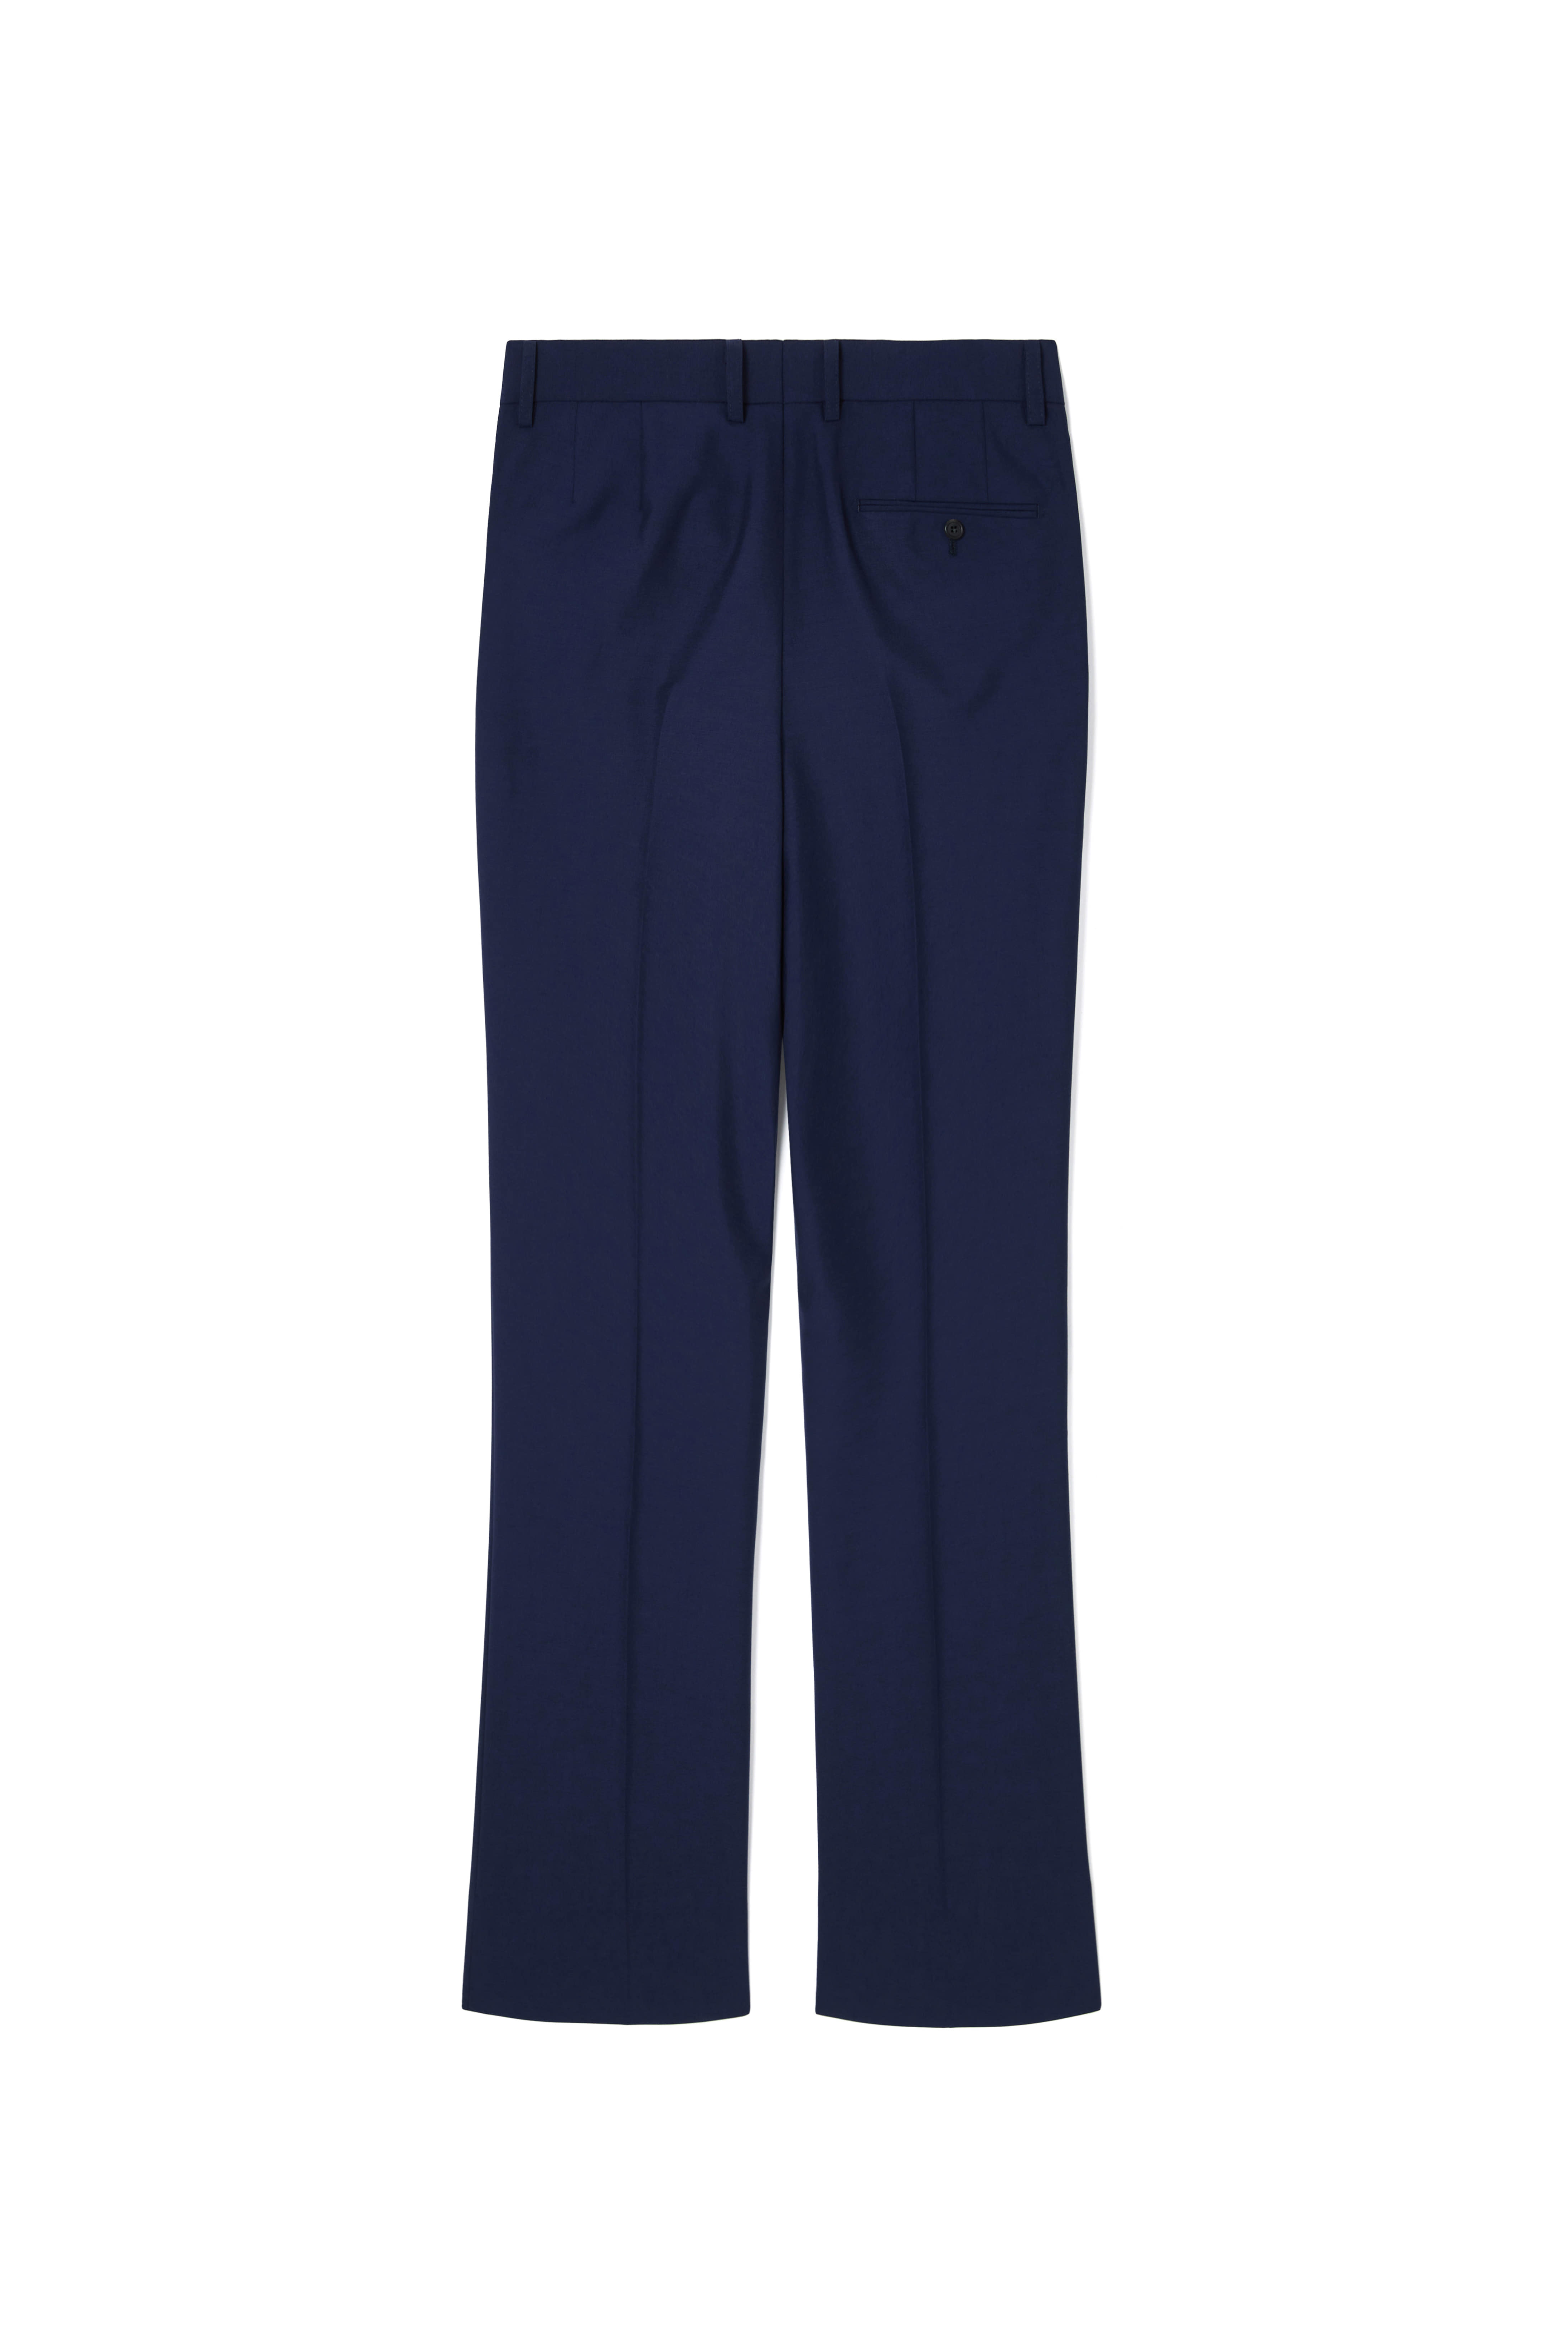 FLARE PANTS IN BLUE